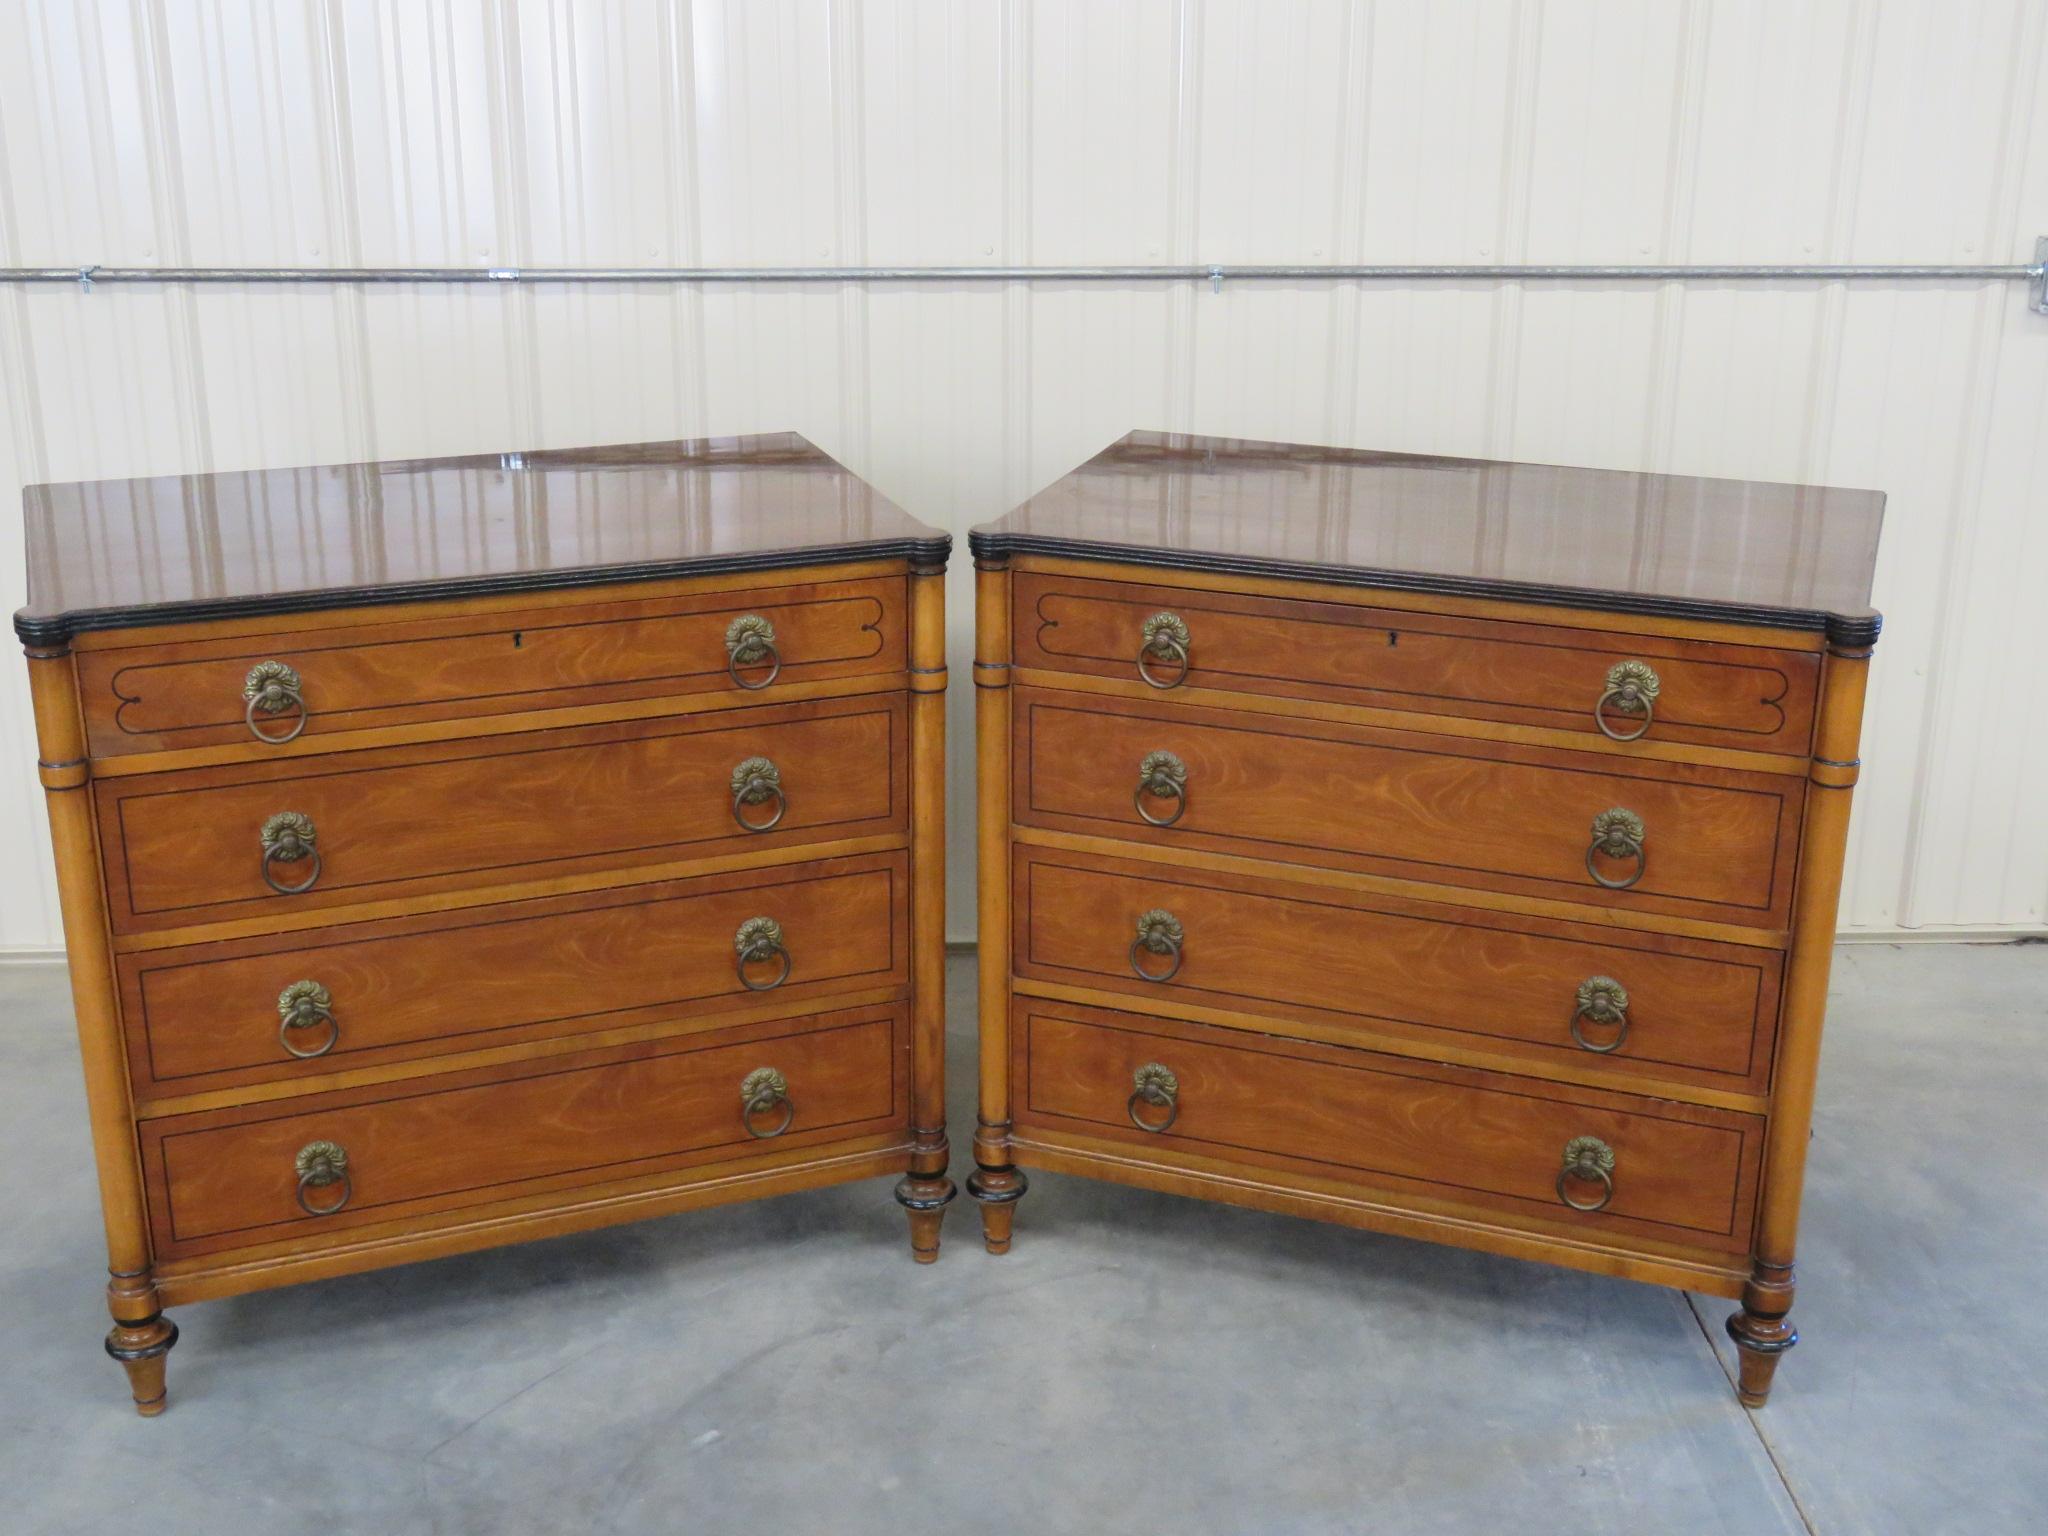 Pair of Kittinger Georgian style 4-drawer commodes with bronze hardware.